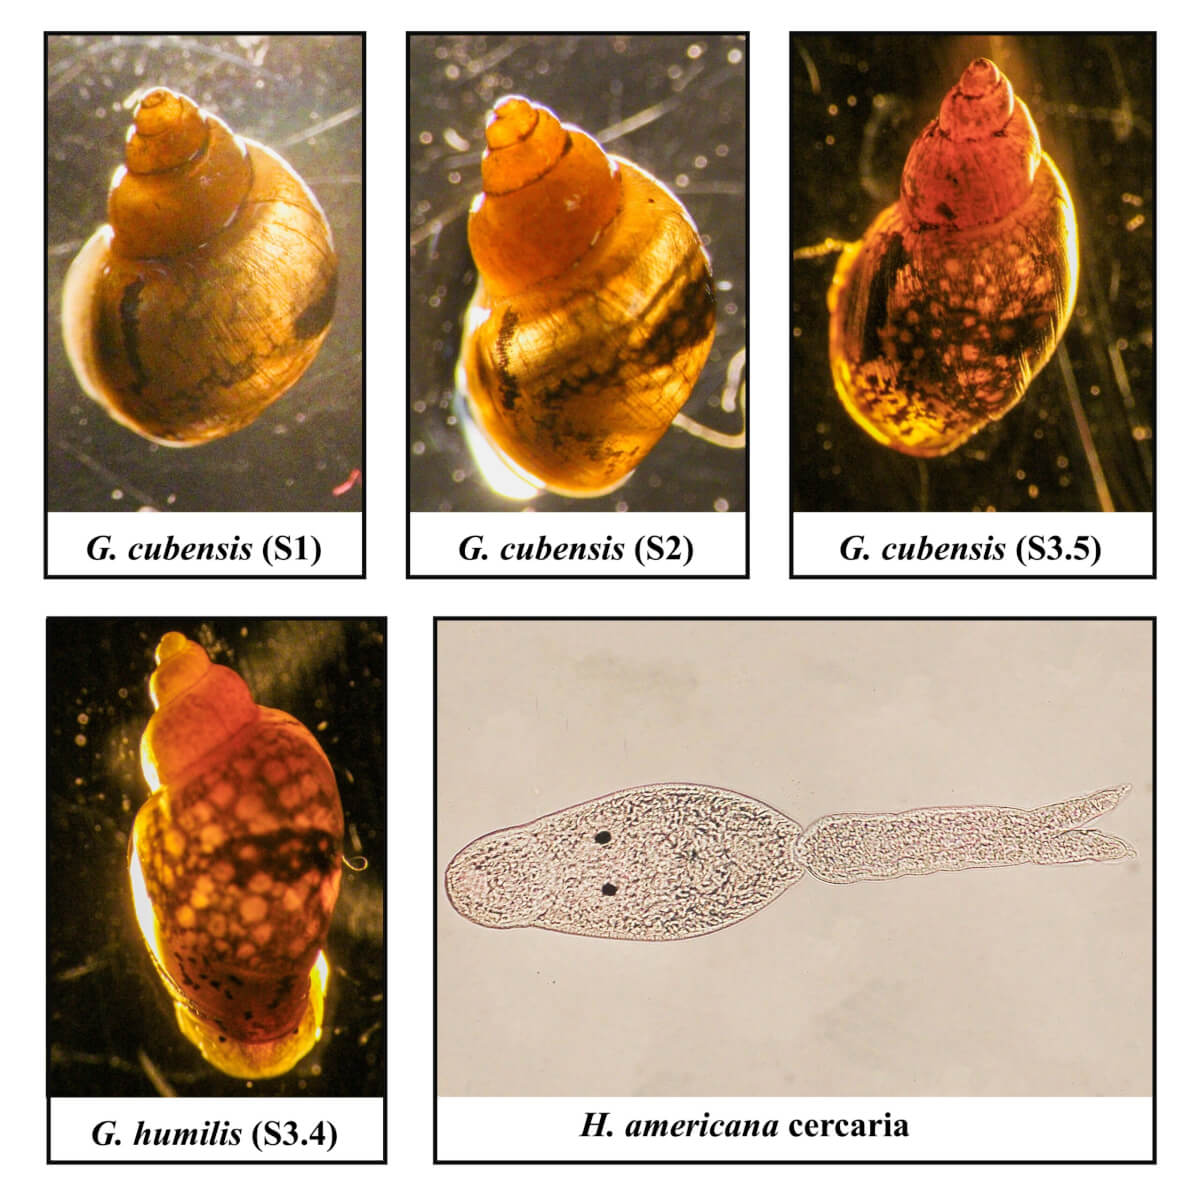 The flatworm H. americana and the snail that transmits it during one of its life stages